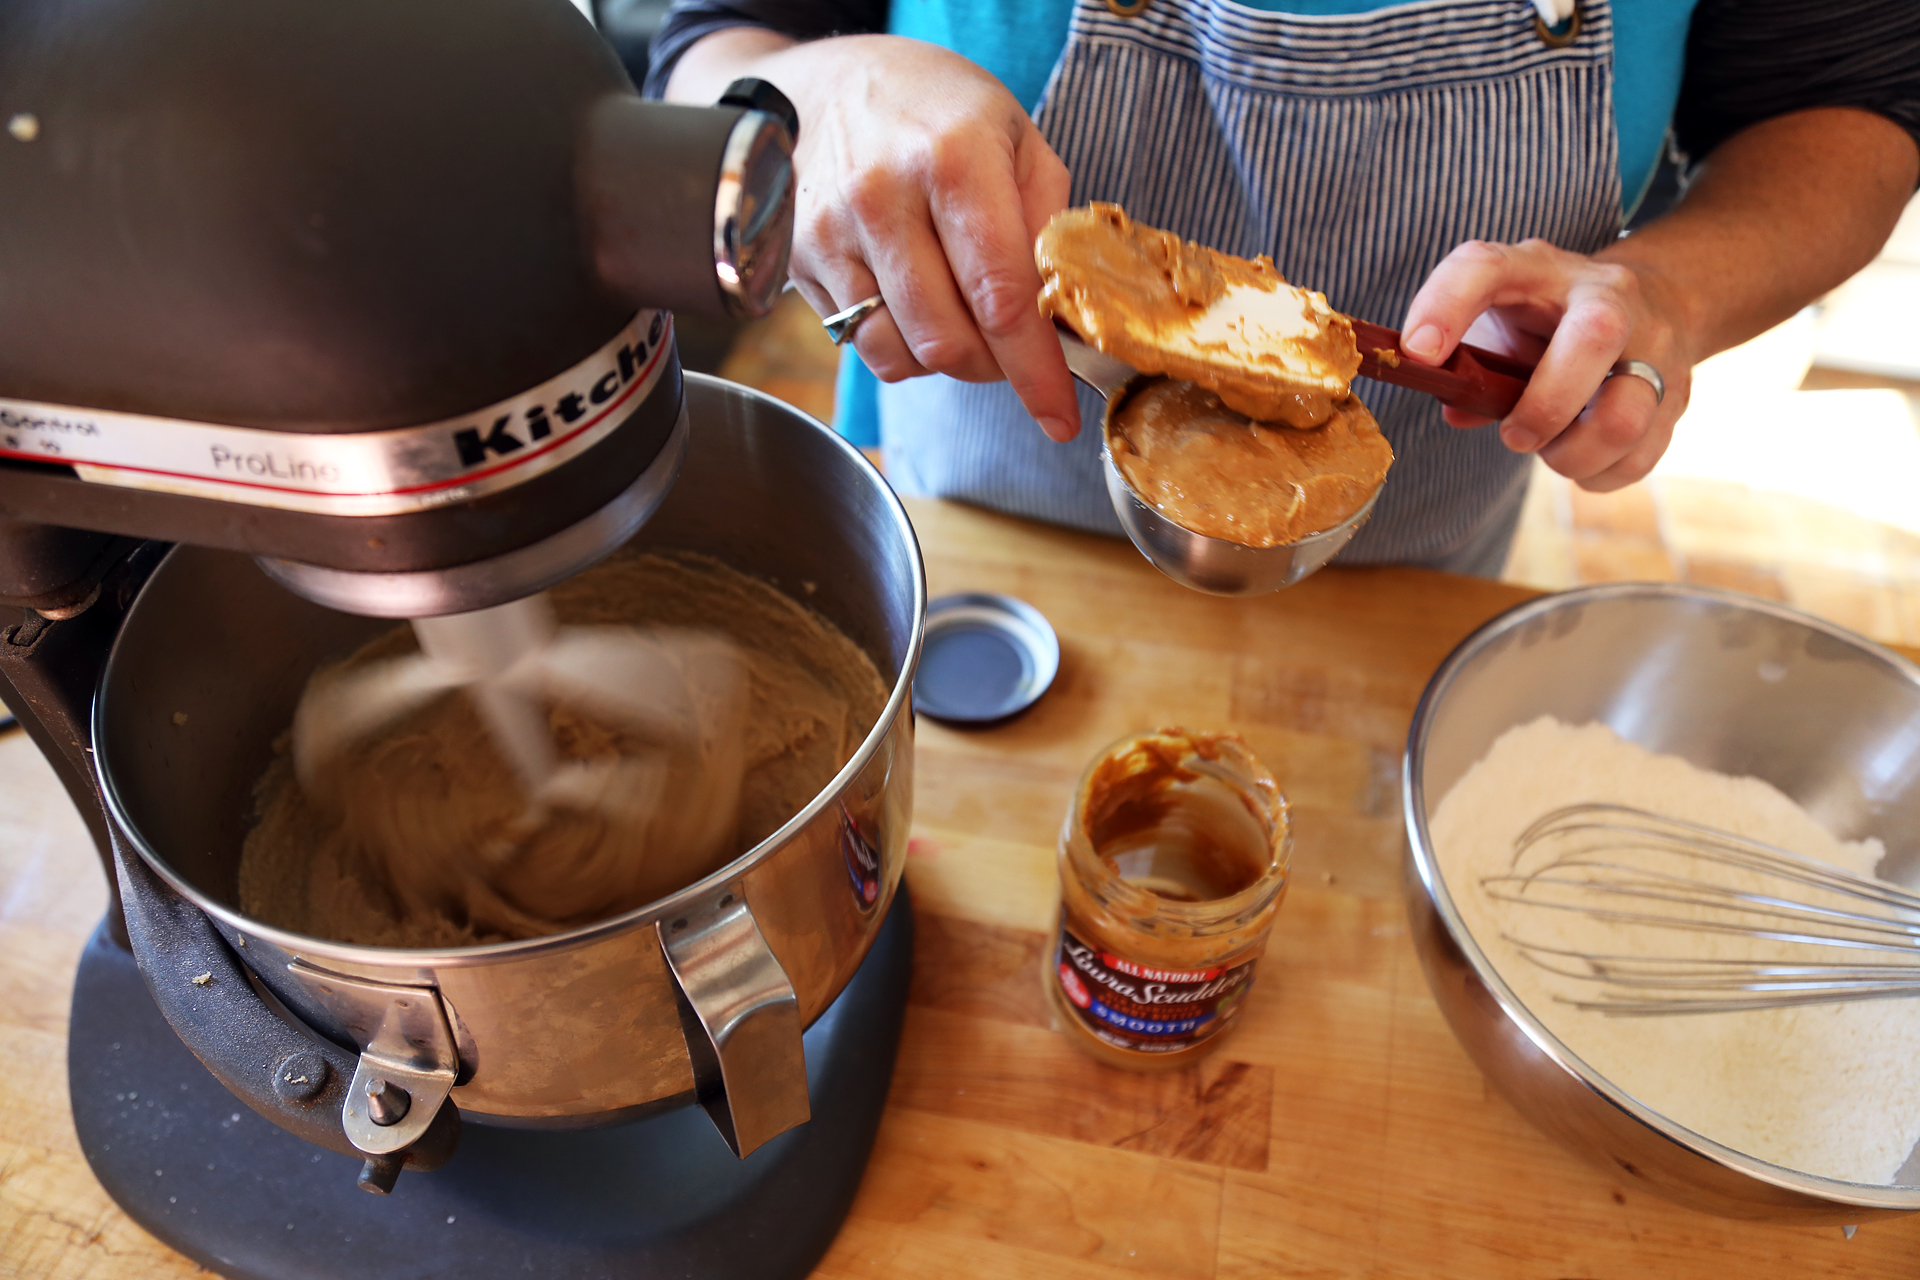  Add the peanut butter and beat until combined.